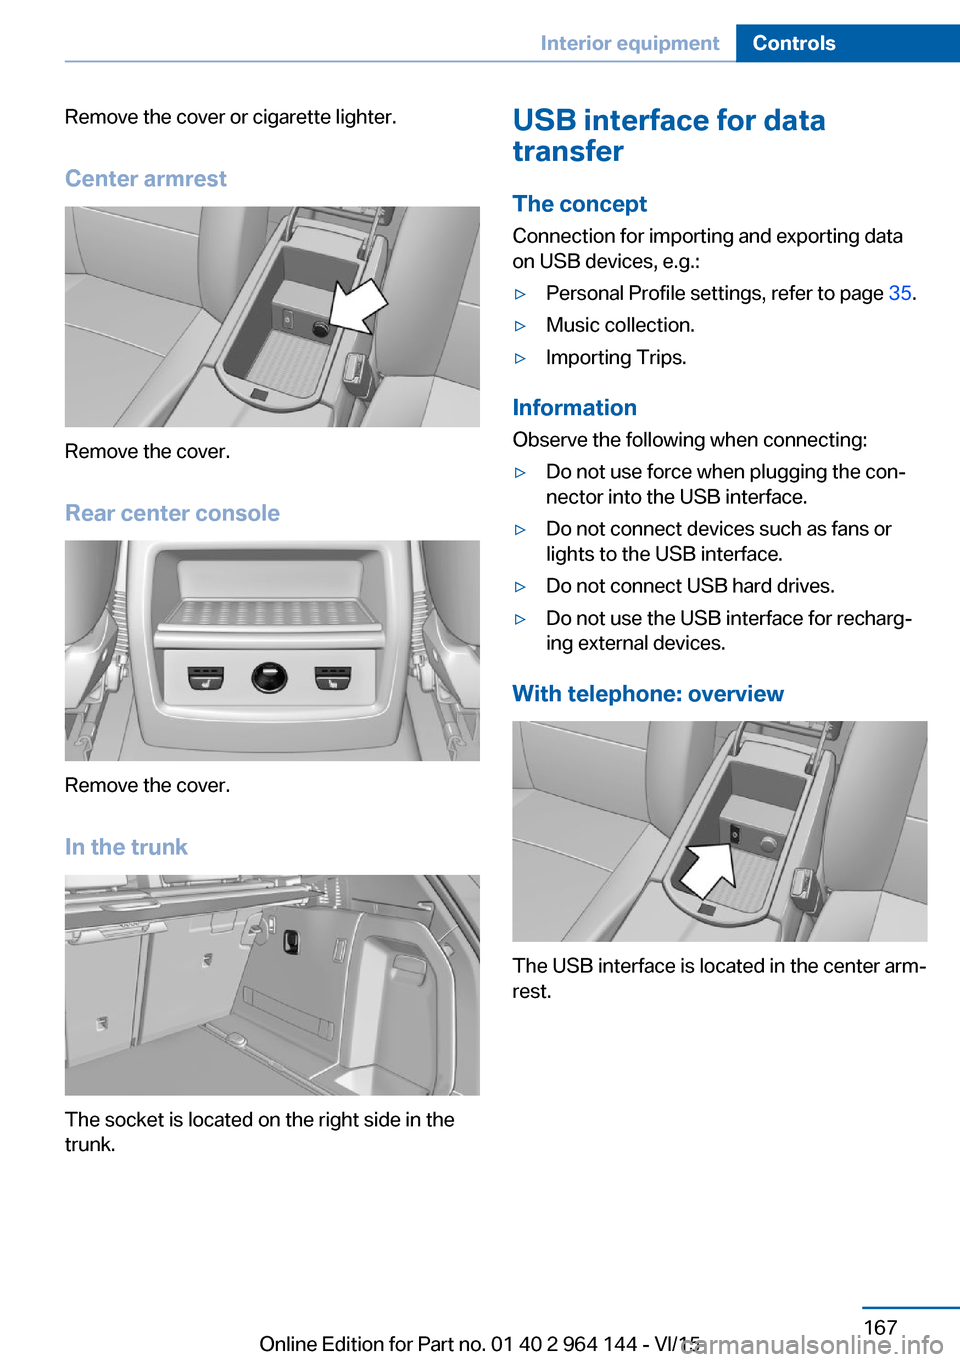 BMW X4 2016 F26 Owners Manual Remove the cover or cigarette lighter.
Center armrest
Remove the cover.
Rear center console
Remove the cover.
In the trunk
The socket is located on the right side in the
trunk.
USB interface for data
